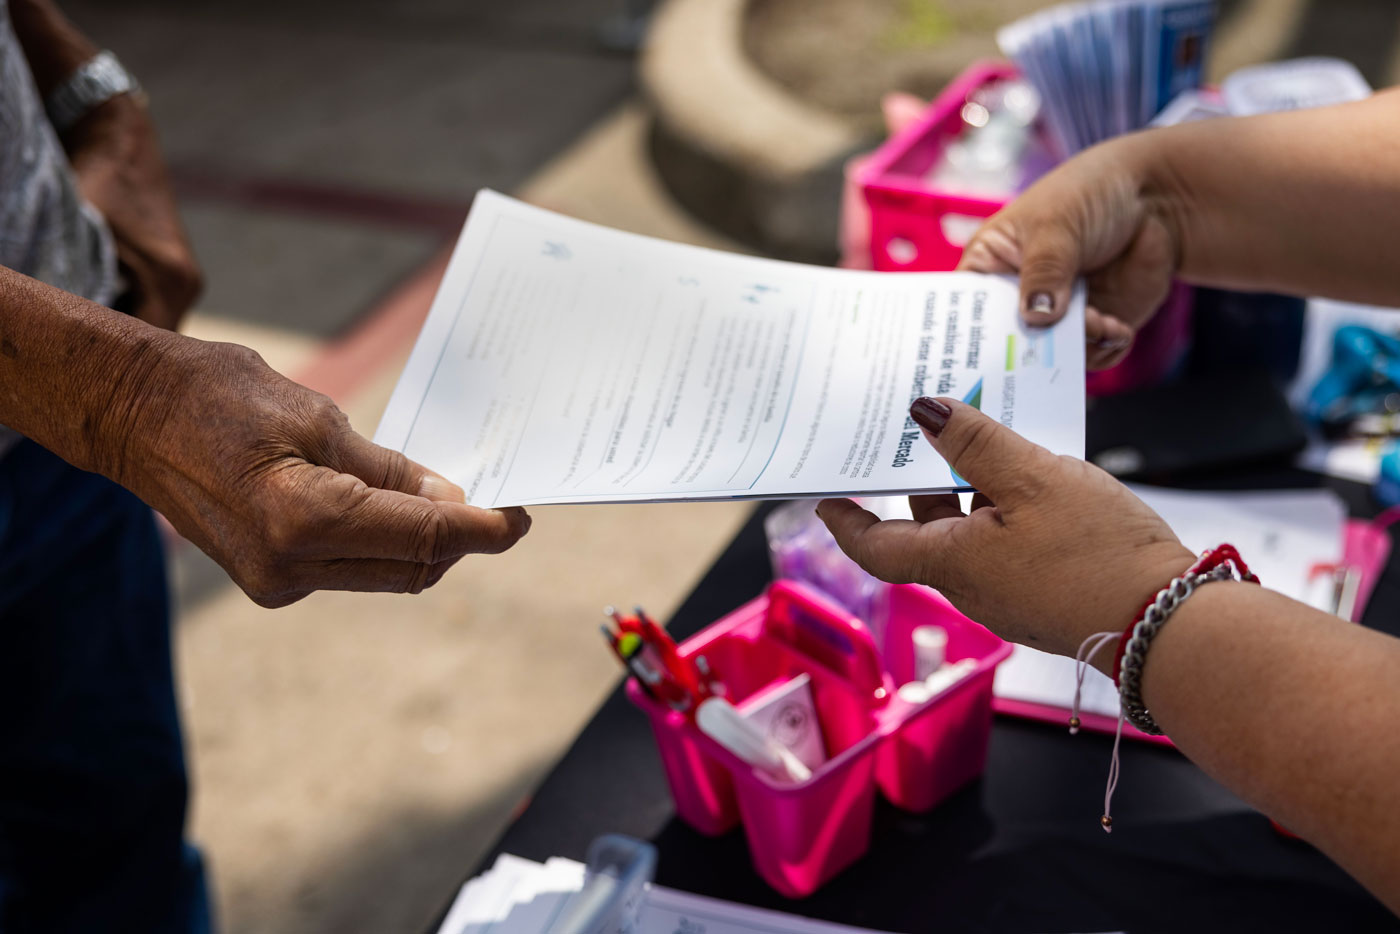 Abelardo Rodriguez, at left, takes an informational pamphlet from Margarita Romo, of Civic Heart Community Services, at right, while he asks about helping his daughter apply for Medicaid during a community health event,